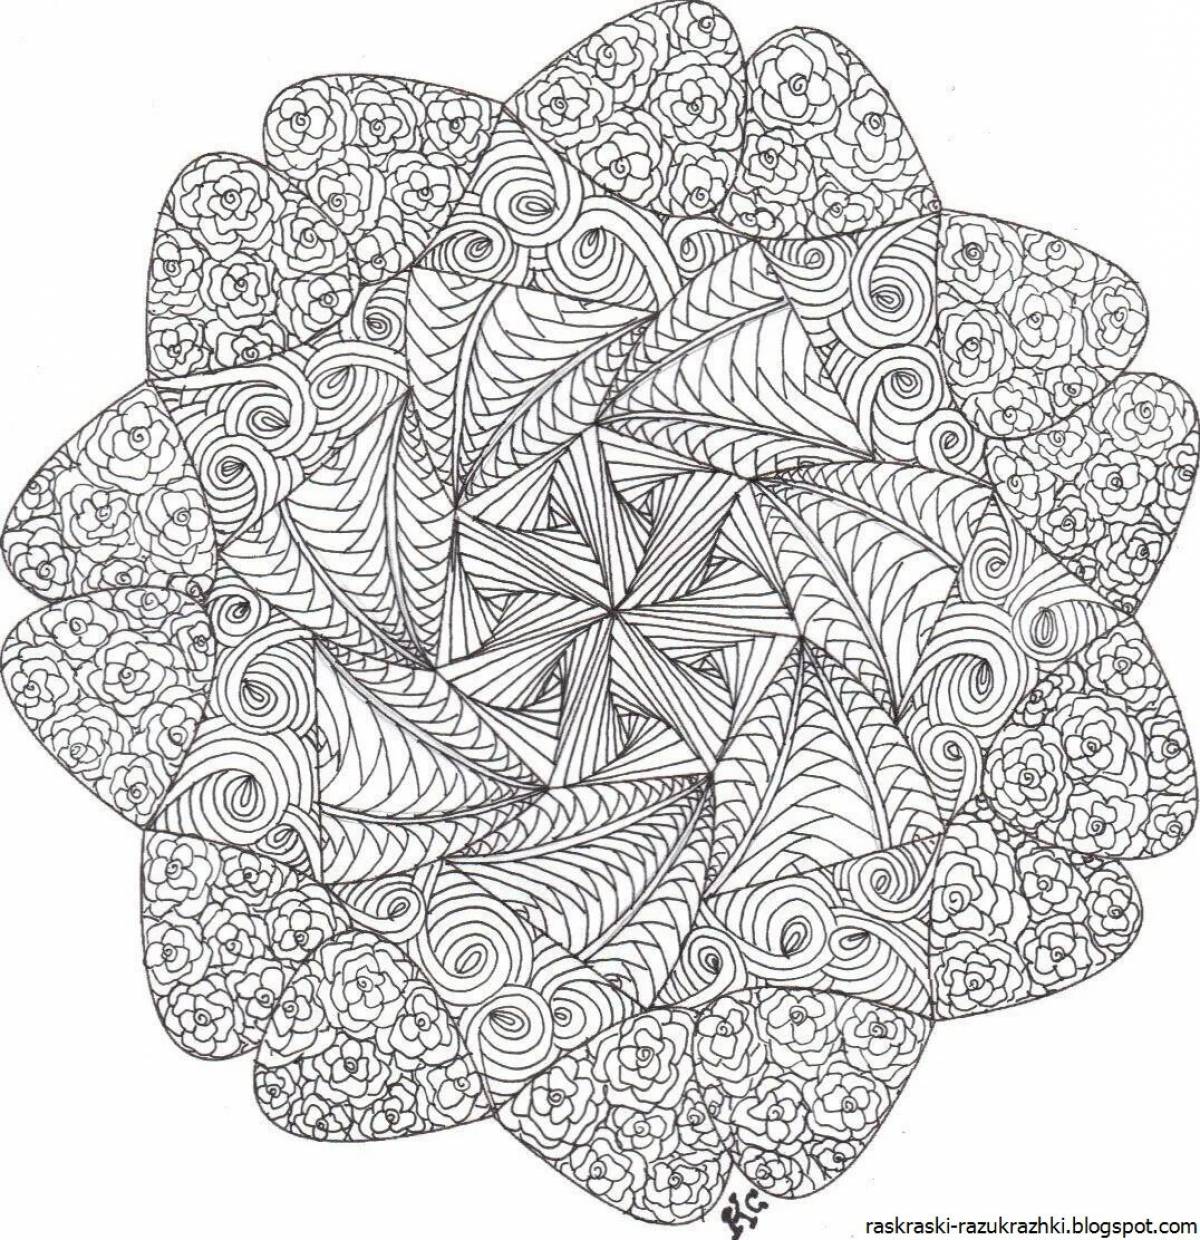 Brightly colored adult coloring page